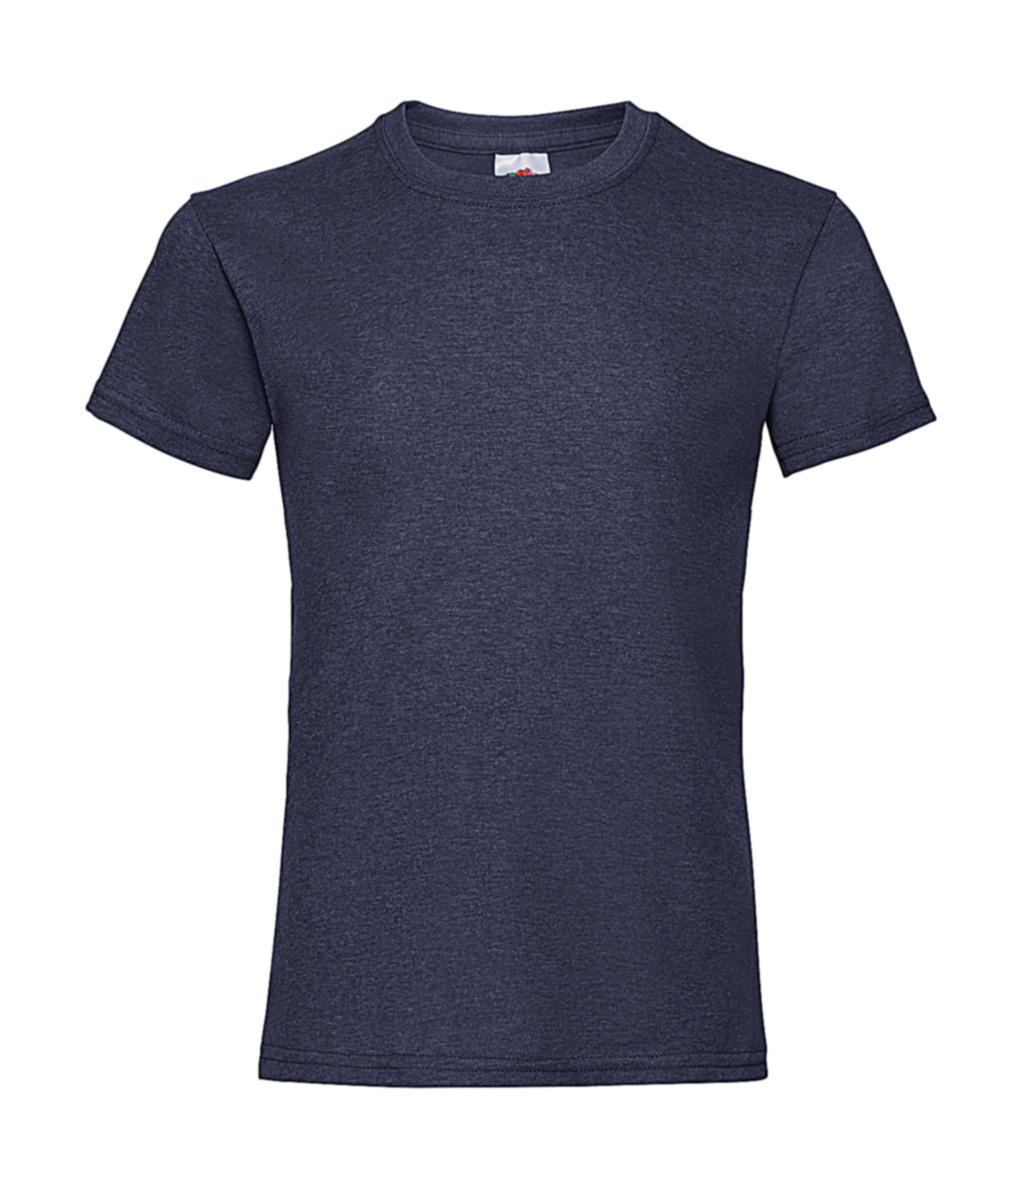  Girls Valueweight T in Farbe Heather Navy